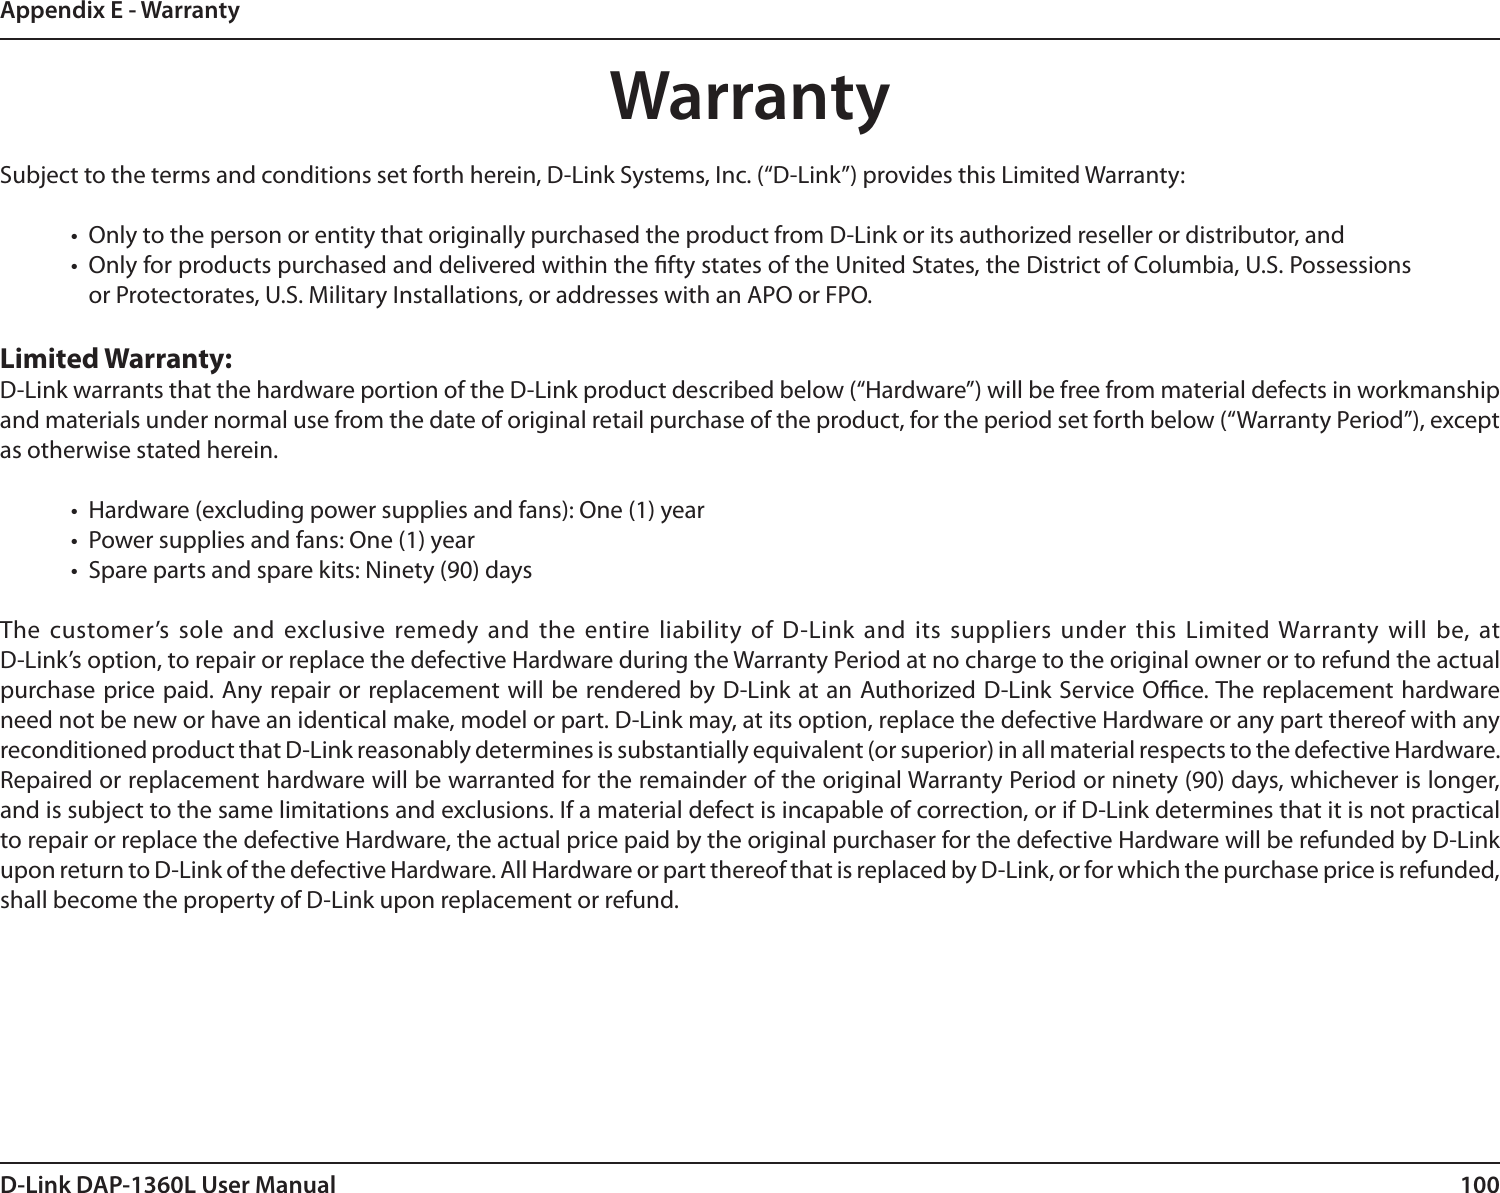 100D-Link DAP-1360L User ManualAppendix E - WarrantyWarrantySubject to the terms and conditions set forth herein, D-Link Systems, Inc. (“D-Link”) provides this Limited Warranty:•  Only to the person or entity that originally purchased the product from D-Link or its authorized reseller or distributor, and•  Only for products purchased and delivered within the fty states of the United States, the District of Columbia, U.S. Possessions or Protectorates, U.S. Military Installations, or addresses with an APO or FPO.Limited Warranty:D-Link warrants that the hardware portion of the D-Link product described below (“Hardware”) will be free from material defects in workmanship and materials under normal use from the date of original retail purchase of the product, for the period set forth below (“Warranty Period”), except as otherwise stated herein.•  Hardware (excluding power supplies and fans): One (1) year•  Power supplies and fans: One (1) year•  Spare parts and spare kits: Ninety (90) daysThe  customer’s  sole  and  exclusive  remedy  and  the  entire  liability  of  D-Link  and  its  suppliers  under  this  Limited Warranty  will  be,  at  D-Link’s option, to repair or replace the defective Hardware during the Warranty Period at no charge to the original owner or to refund the actual purchase price paid. Any repair or replacement will be rendered by D-Link  at an Authorized D-Link Service Oce. The replacement hardware need not be new or have an identical make, model or part. D-Link may, at its option, replace the defective Hardware or any part thereof with any reconditioned product that D-Link reasonably determines is substantially equivalent (or superior) in all material respects to the defective Hardware. Repaired or replacement hardware will be warranted for the remainder of the original Warranty Period or ninety (90) days, whichever is longer, and is subject to the same limitations and exclusions. If a material defect is incapable of correction, or if D-Link determines that it is not practical to repair or replace the defective Hardware, the actual price paid by the original purchaser for the defective Hardware will be refunded by D-Link upon return to D-Link of the defective Hardware. All Hardware or part thereof that is replaced by D-Link, or for which the purchase price is refunded, shall become the property of D-Link upon replacement or refund.